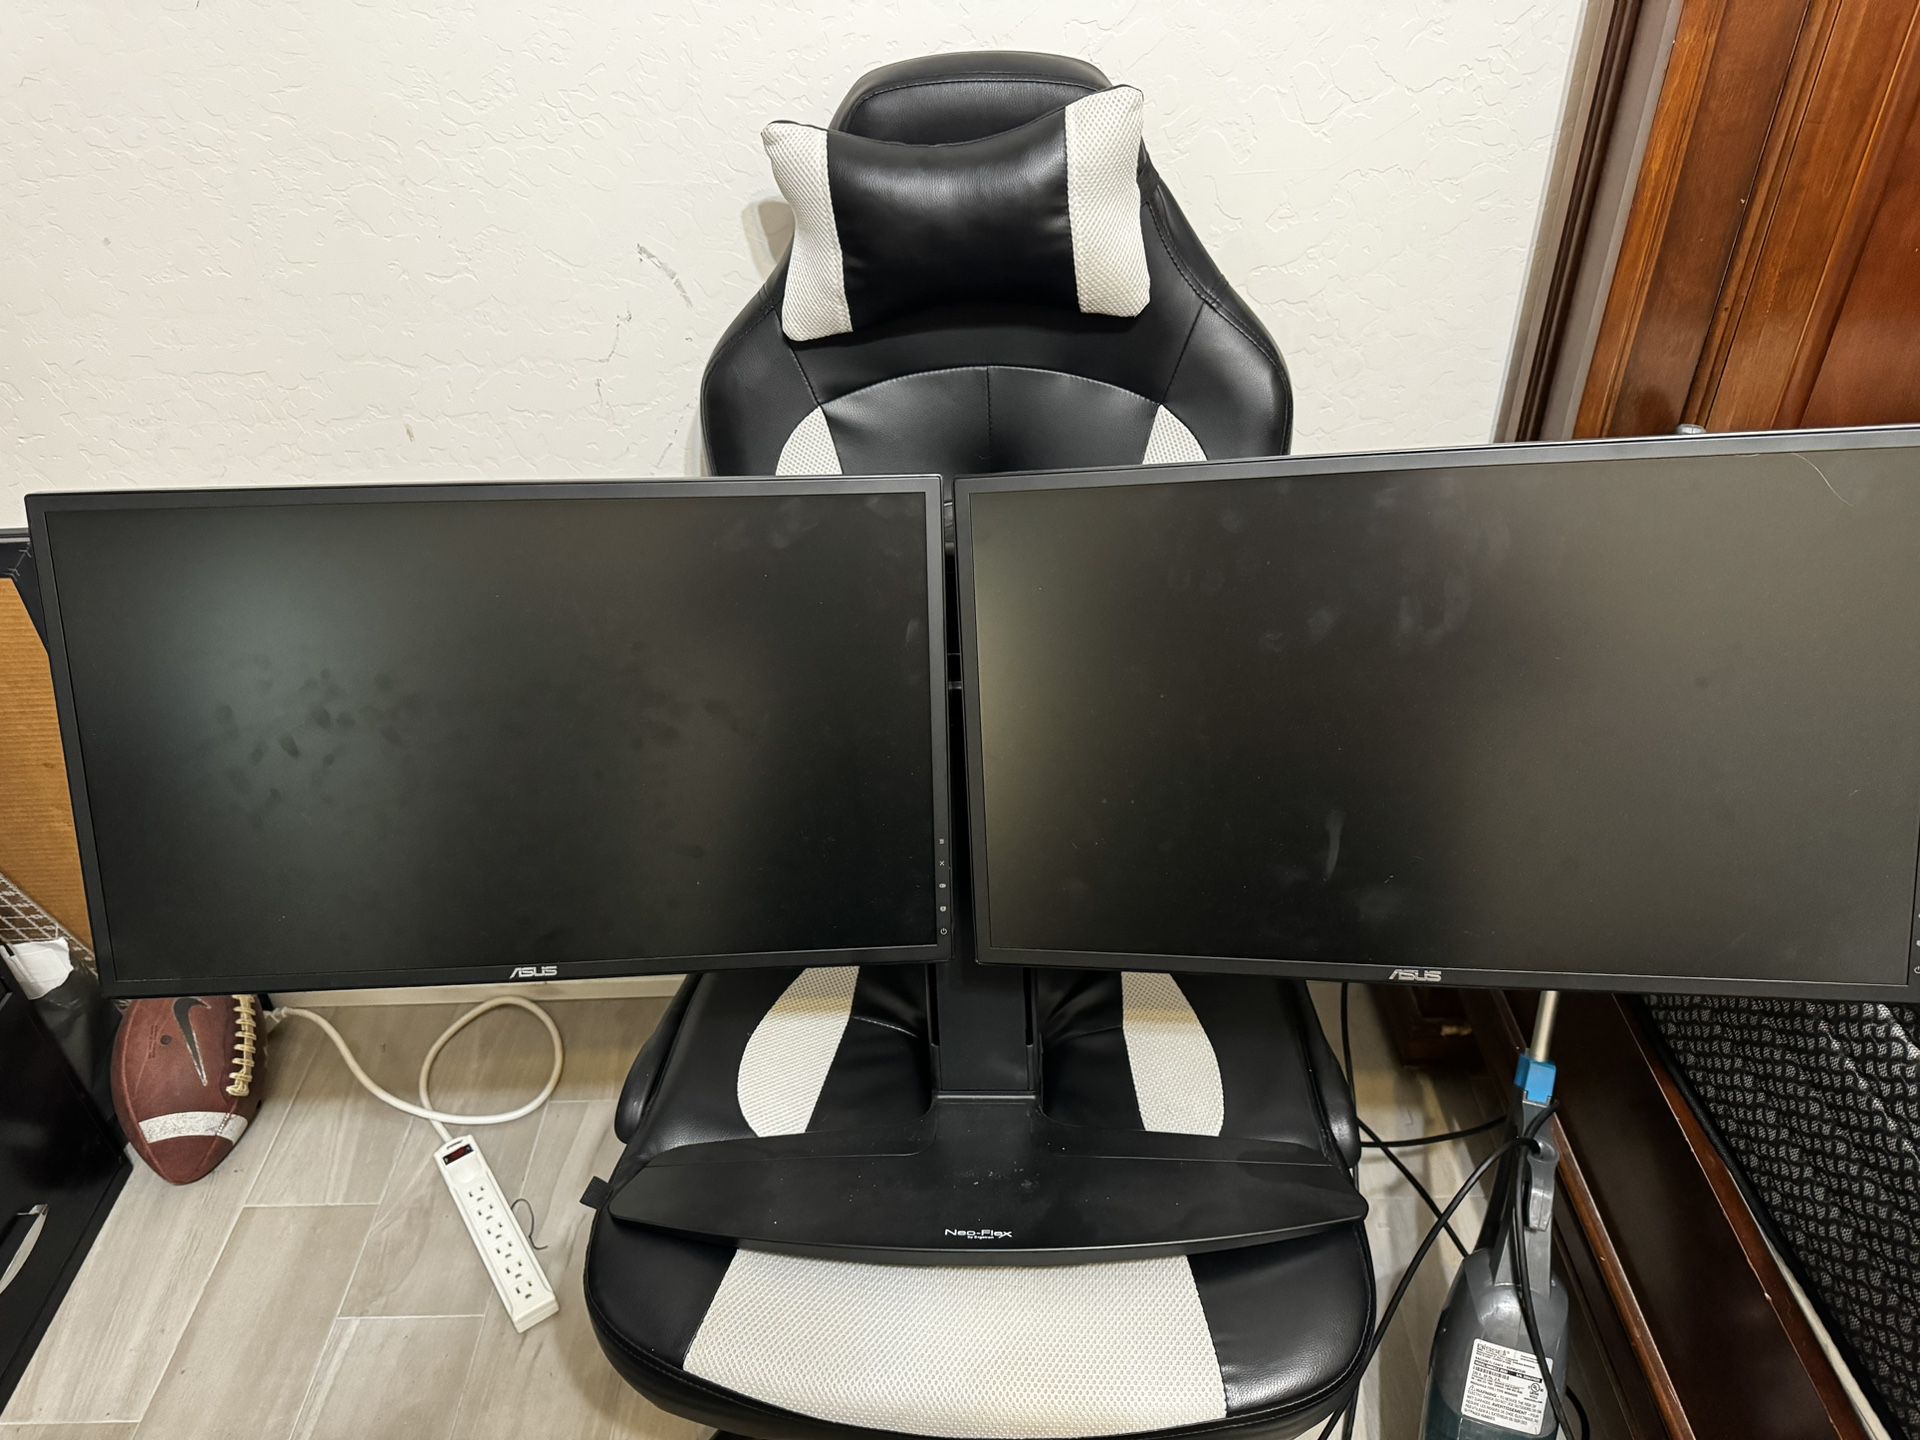 Dual Monitors With stand